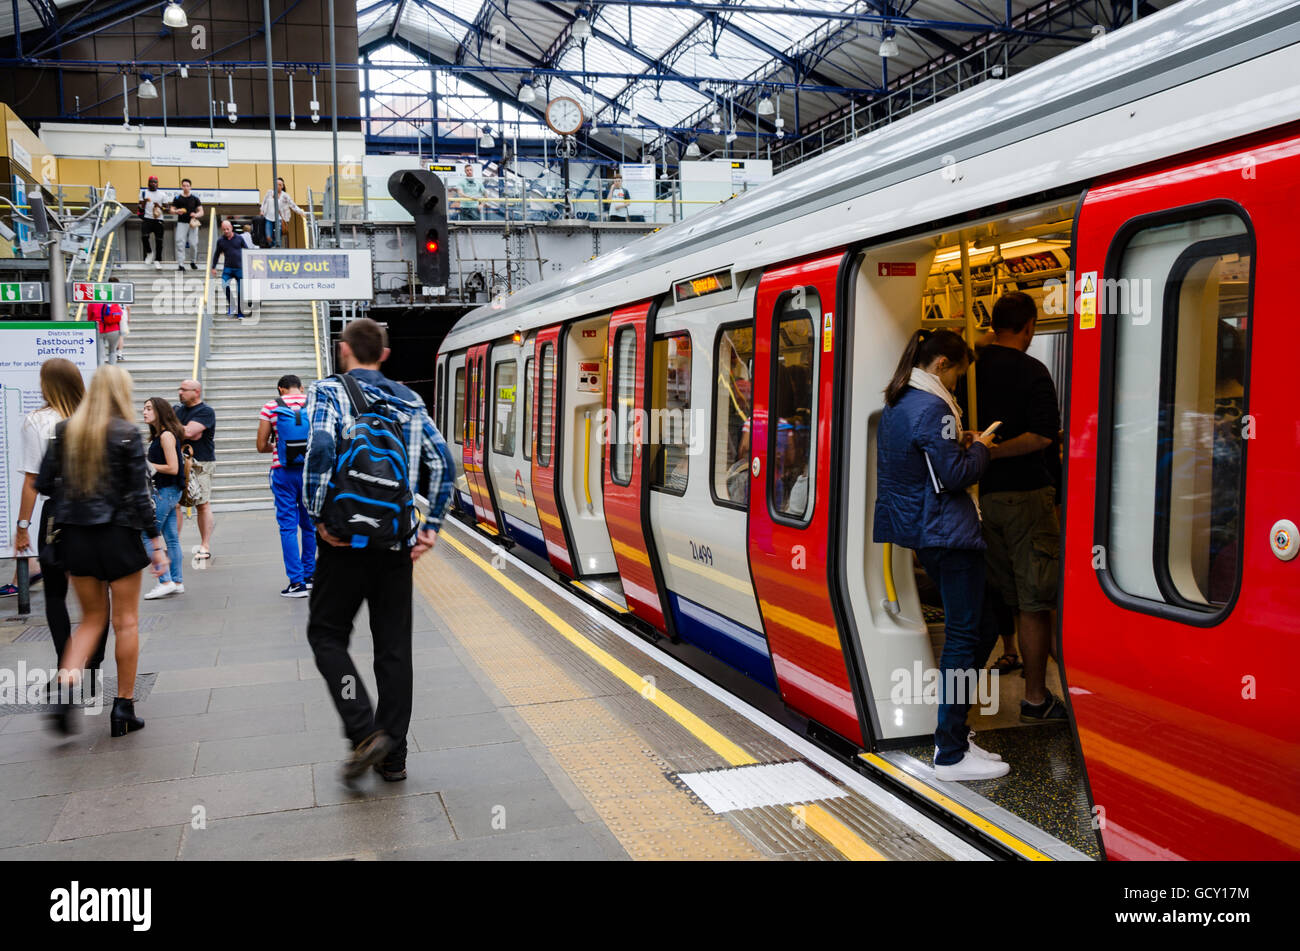 A train sits in Earl's Court London Underground Station waiting to depart. Stock Photo